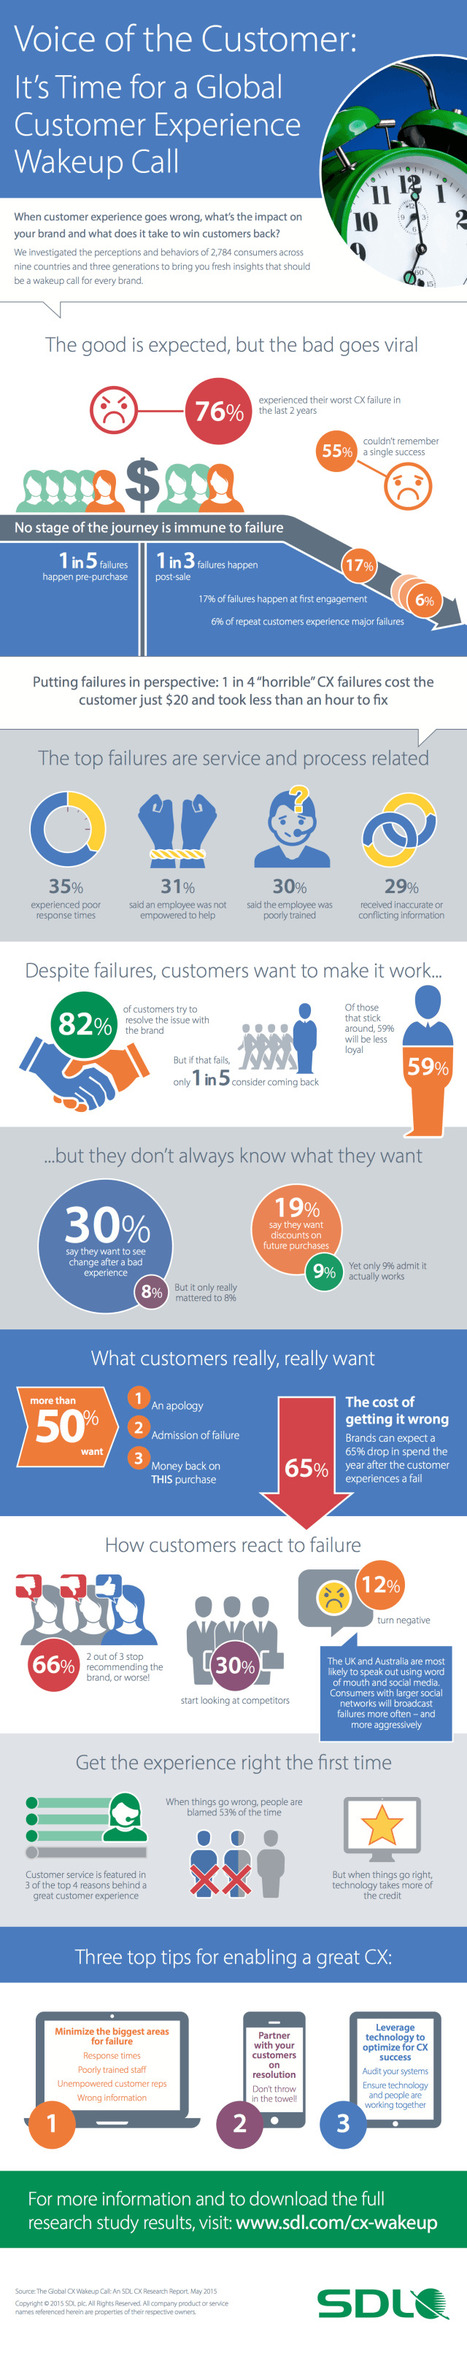 Failed Customer Experiences Are Destroying Your Marketing | Marketing Technology | digital marketing strategy | Scoop.it